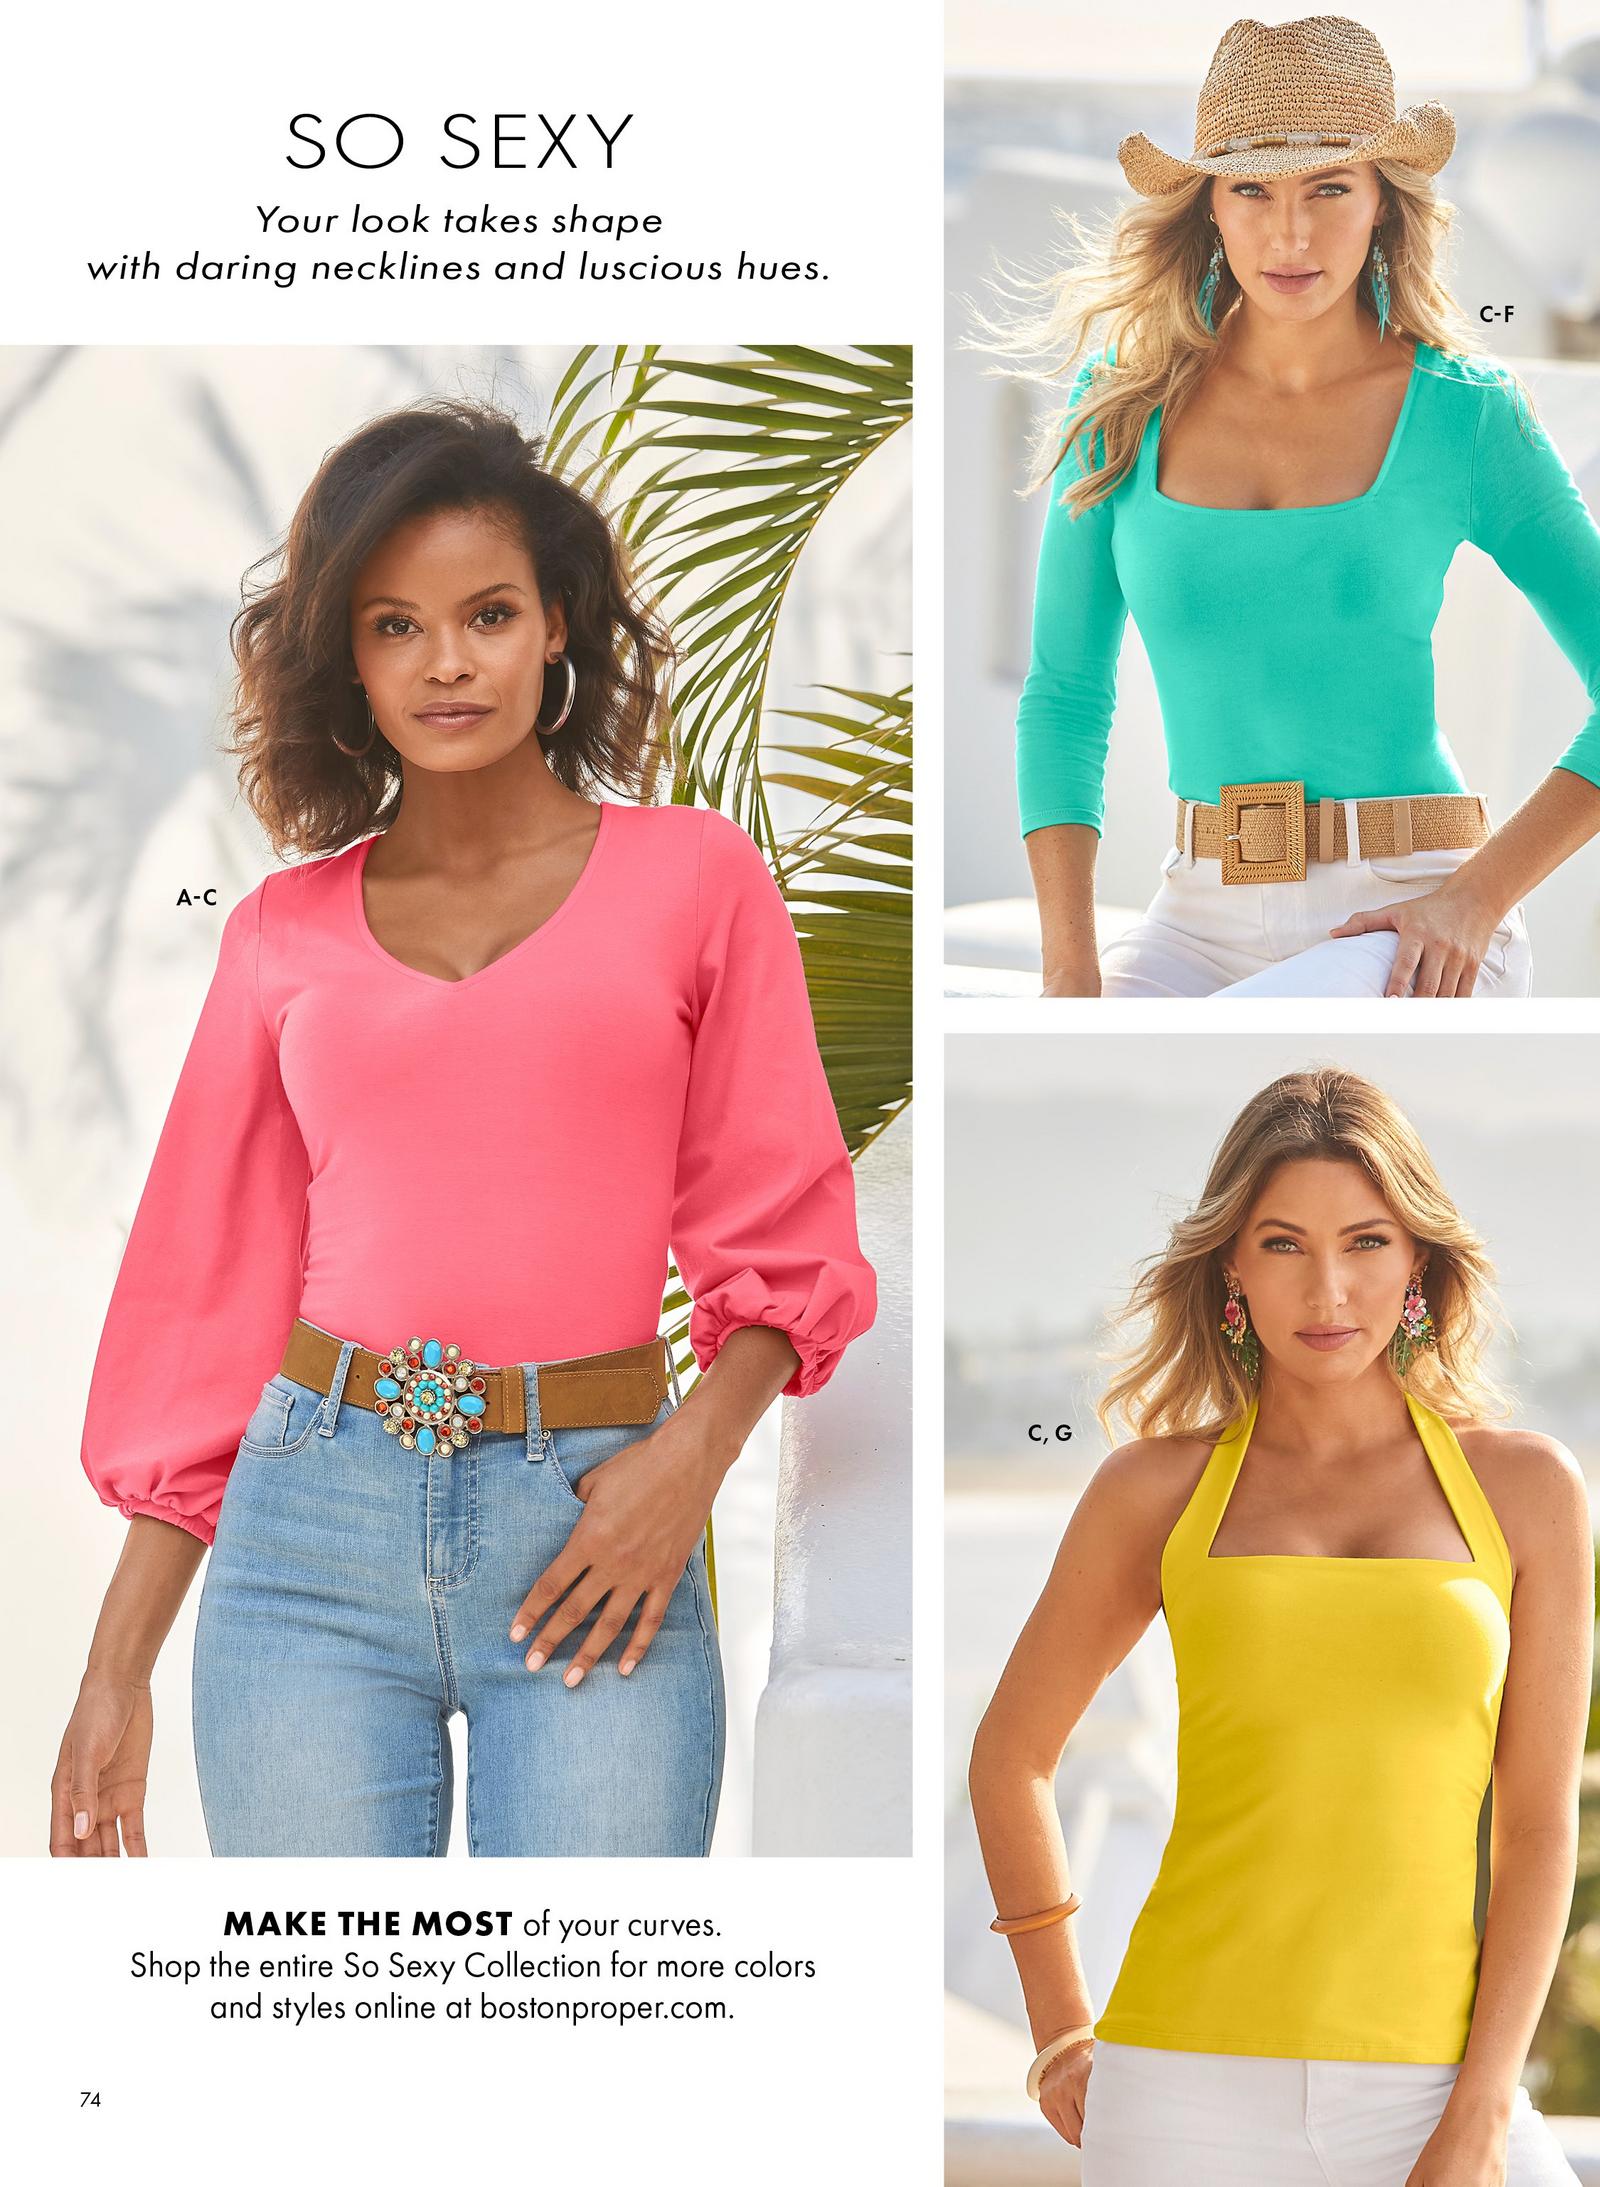 left model wearing a pink balloon sleeve v-neck top, brown belt with stone embellishments, and light wash jeans. top right model wearing a mint square-neck three-quarter sleeve top, raffia belt, white jeans, and fedora hat.